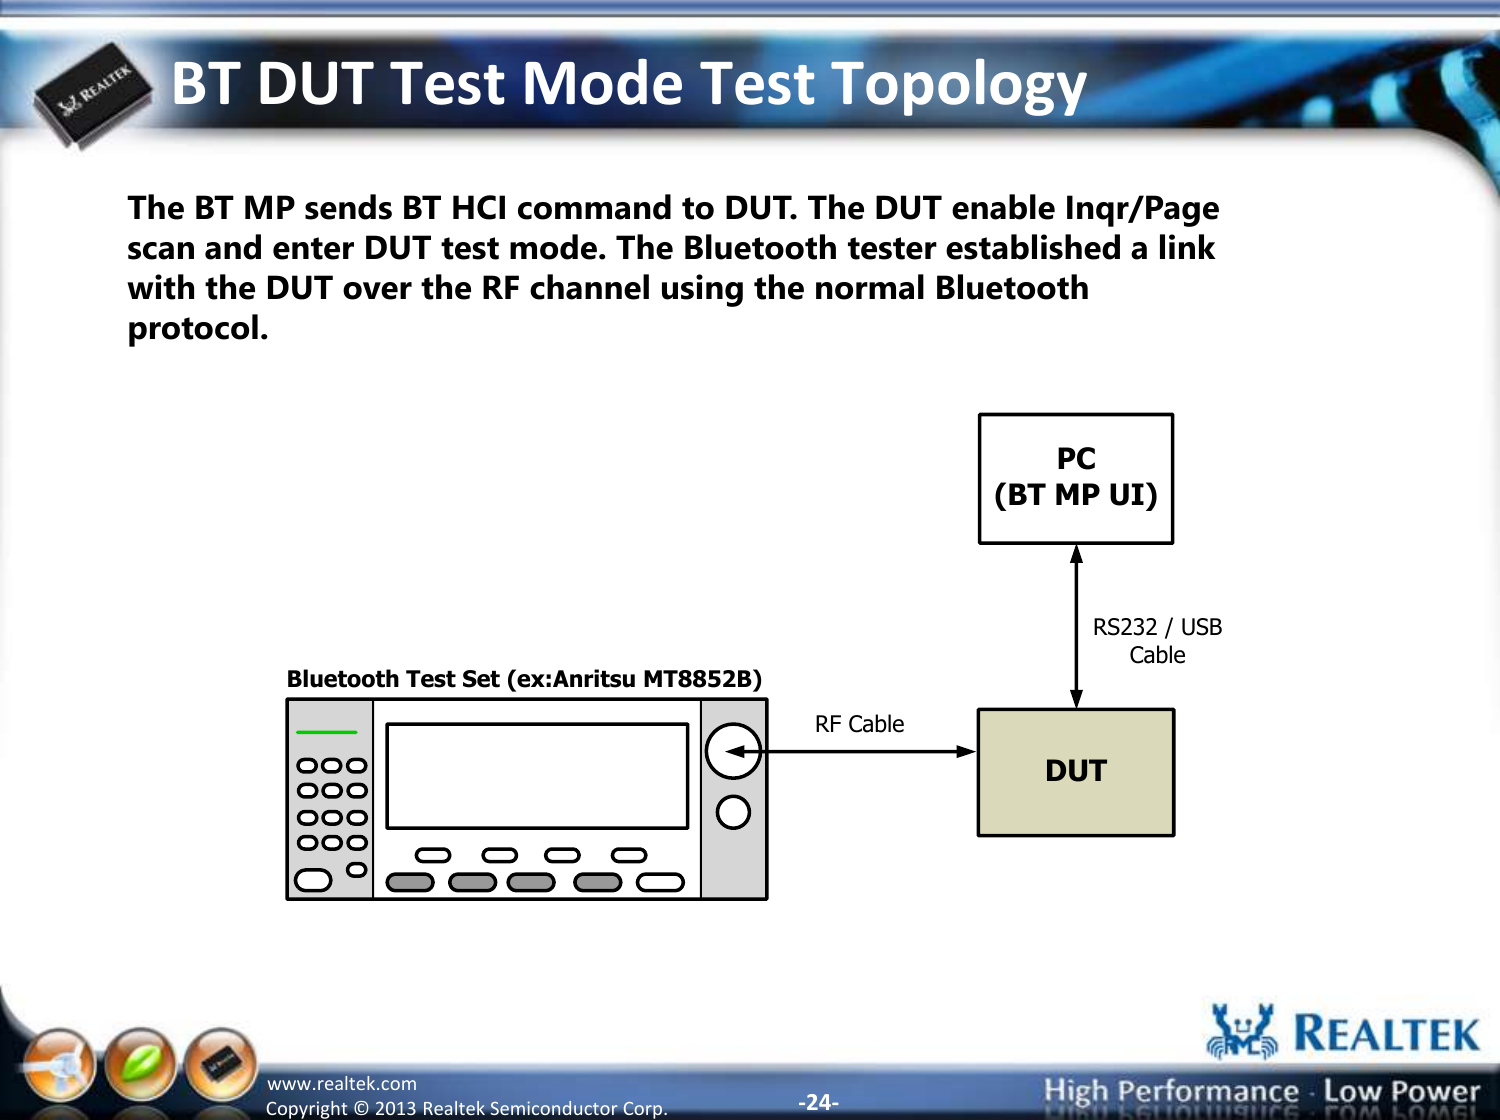 -24- Copyright ©  2013 Realtek Semiconductor Corp. www.realtek.com BT DUT Test Mode Test Topology The BT MP sends BT HCI command to DUT. The DUT enable Inqr/Page scan and enter DUT test mode. The Bluetooth tester established a link with the DUT over the RF channel using the normal Bluetooth protocol. Bluetooth Test Set (ex:Anritsu MT8852B)DUTPC(BT MP UI)RF CableRS232 / USB Cable